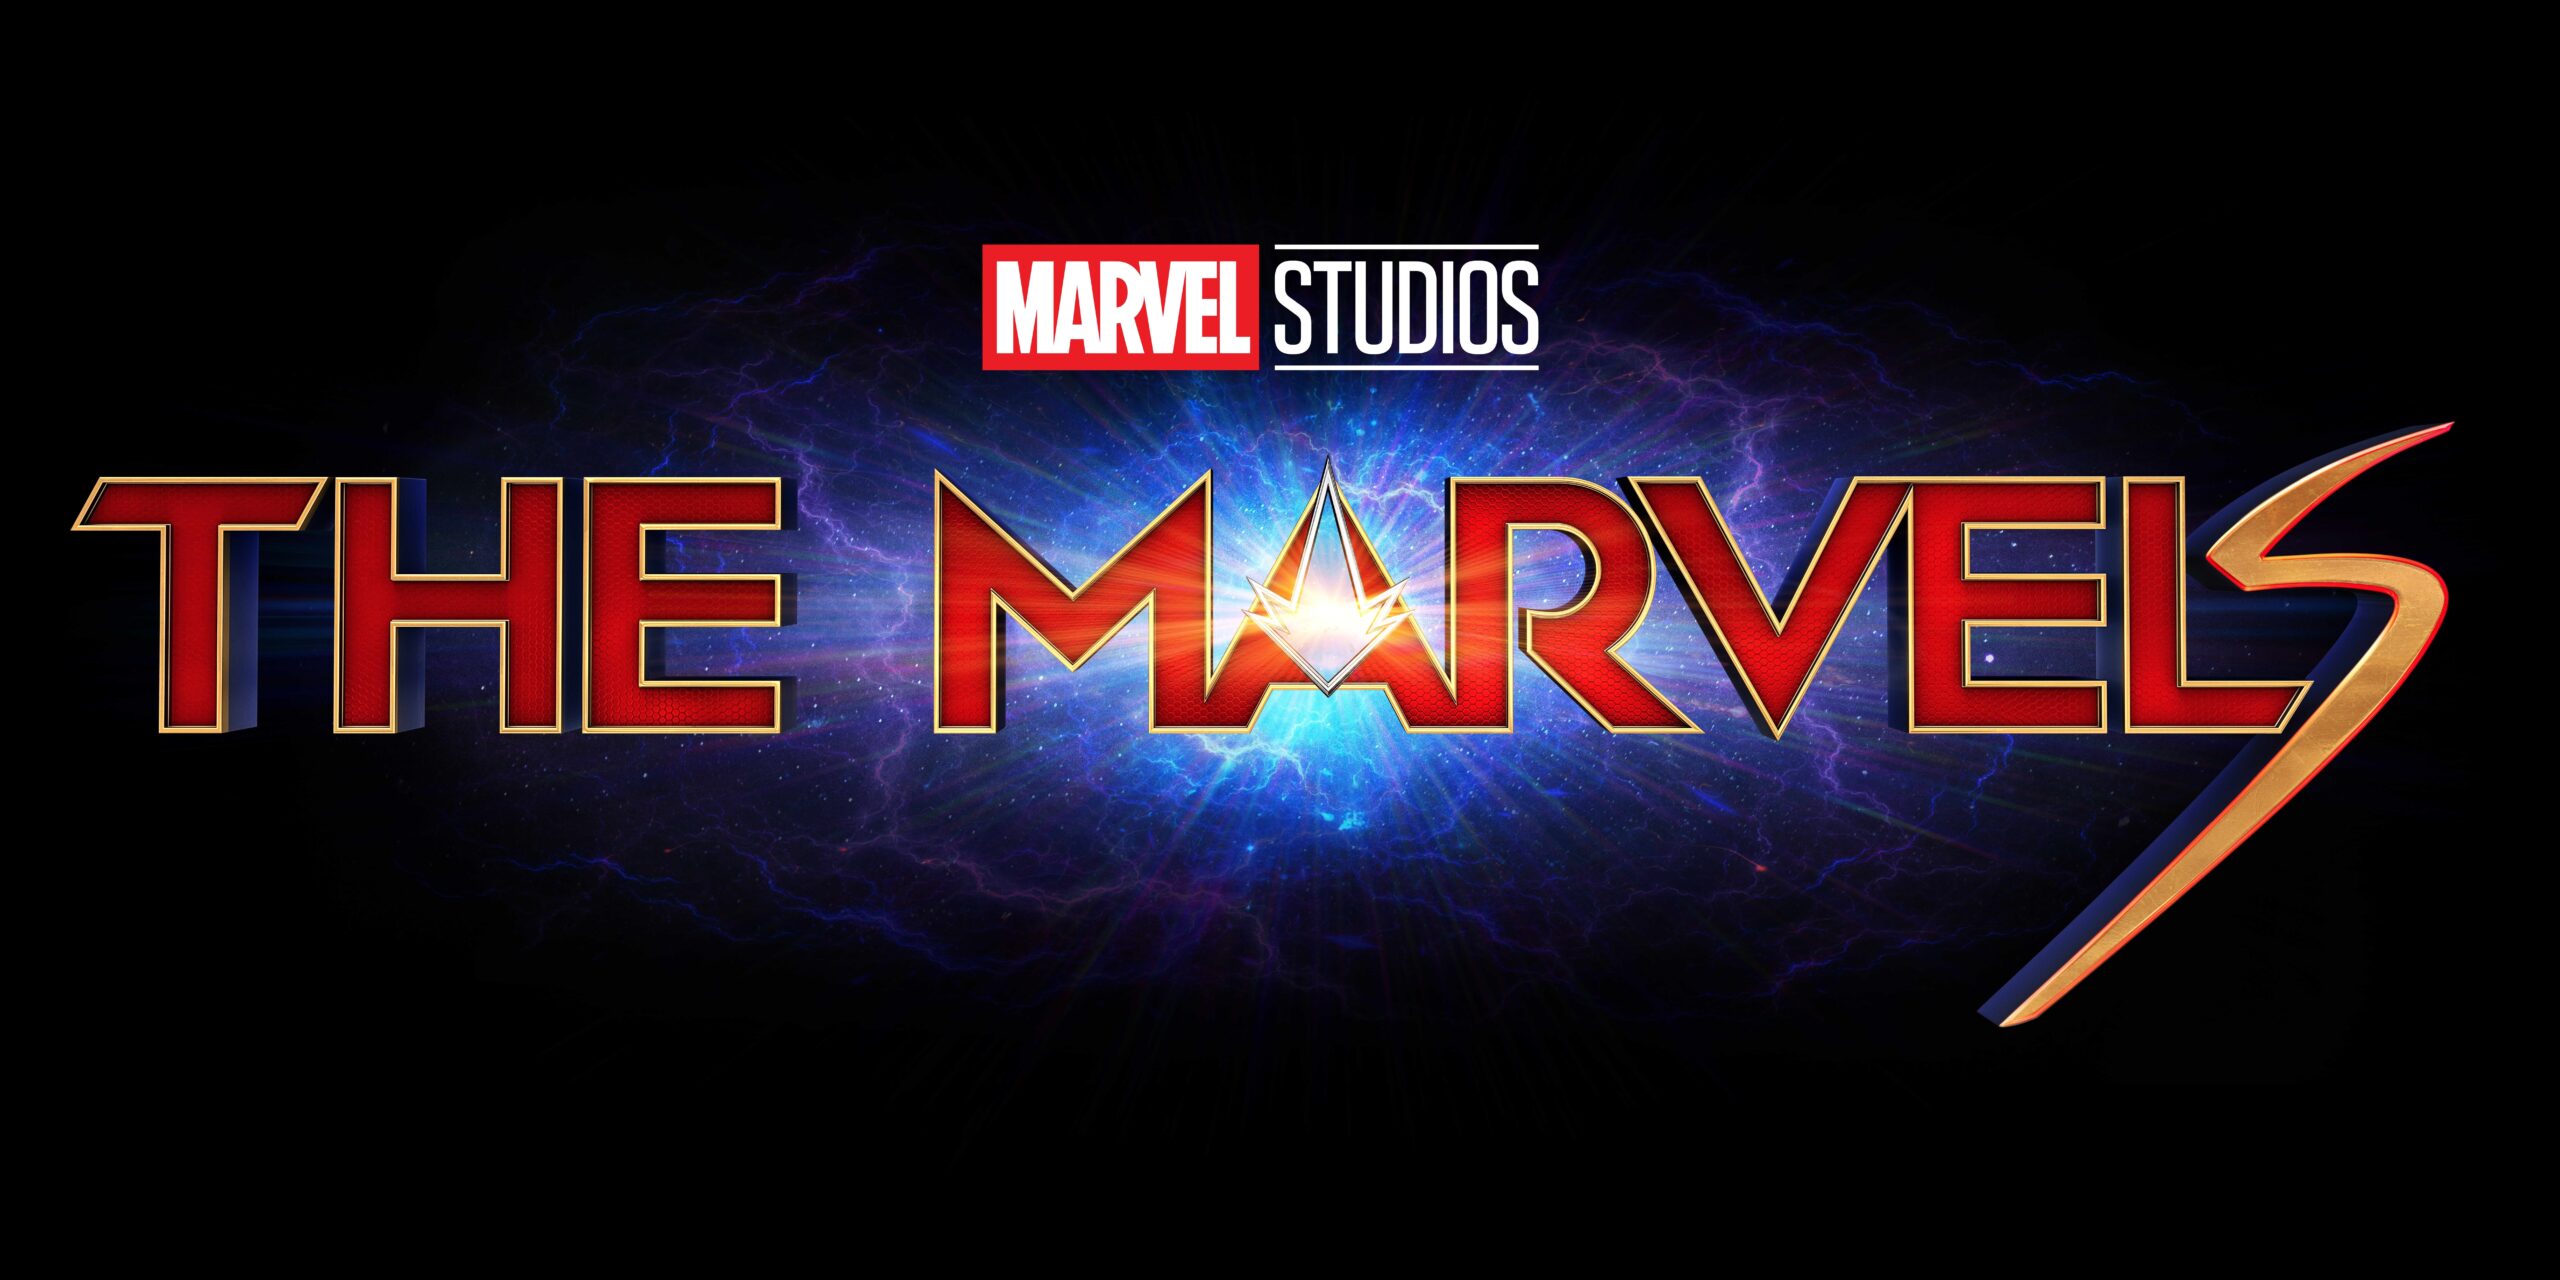 Marvel Studios Shares Exciting New Looks At 'The Marvels' and New Posters  to Celebrate Tickets On Sale